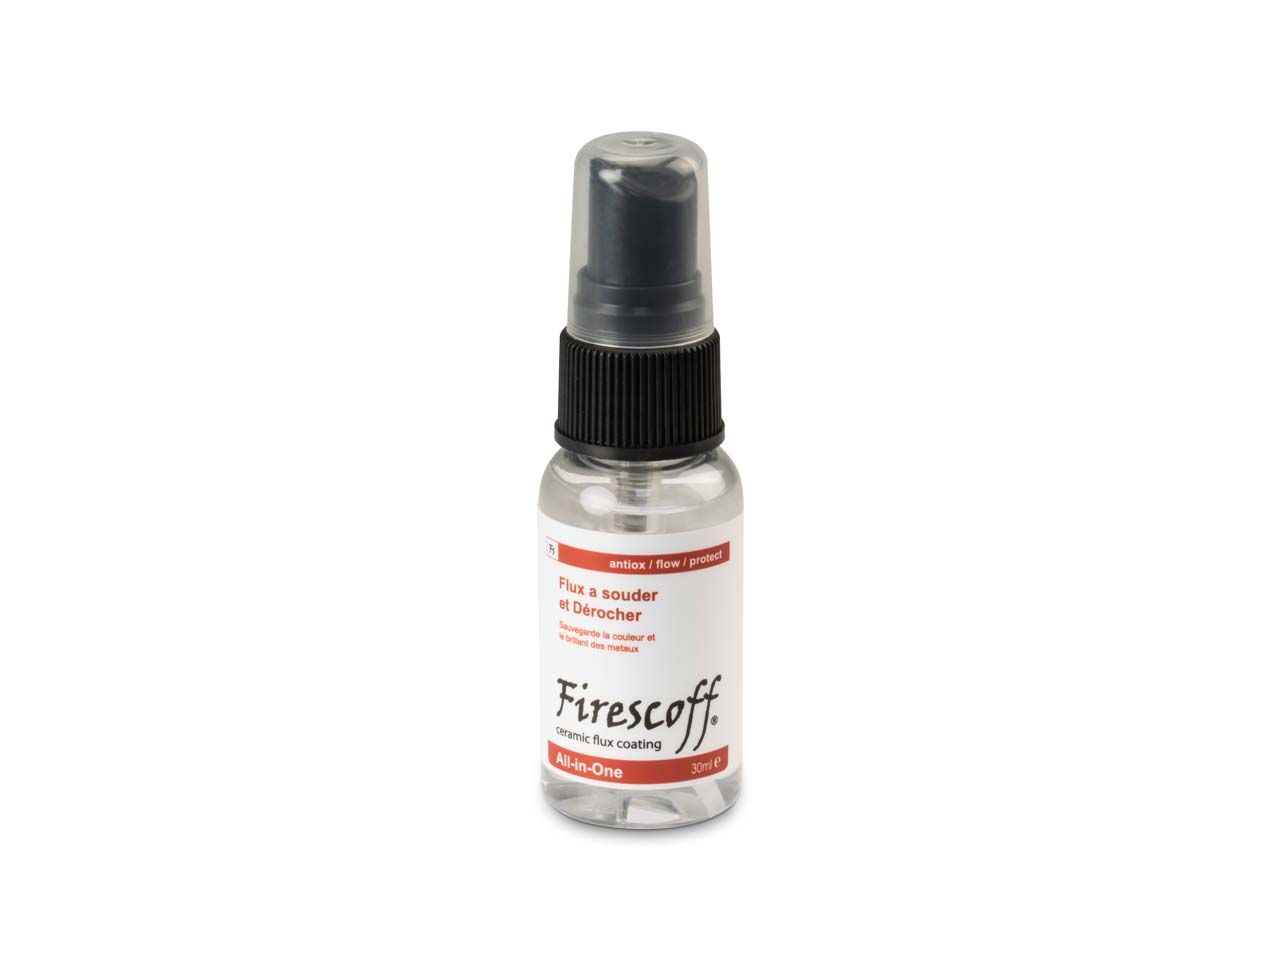 Do you have a safety data sheet for Firescoff� Ceramic Flux 30ml?